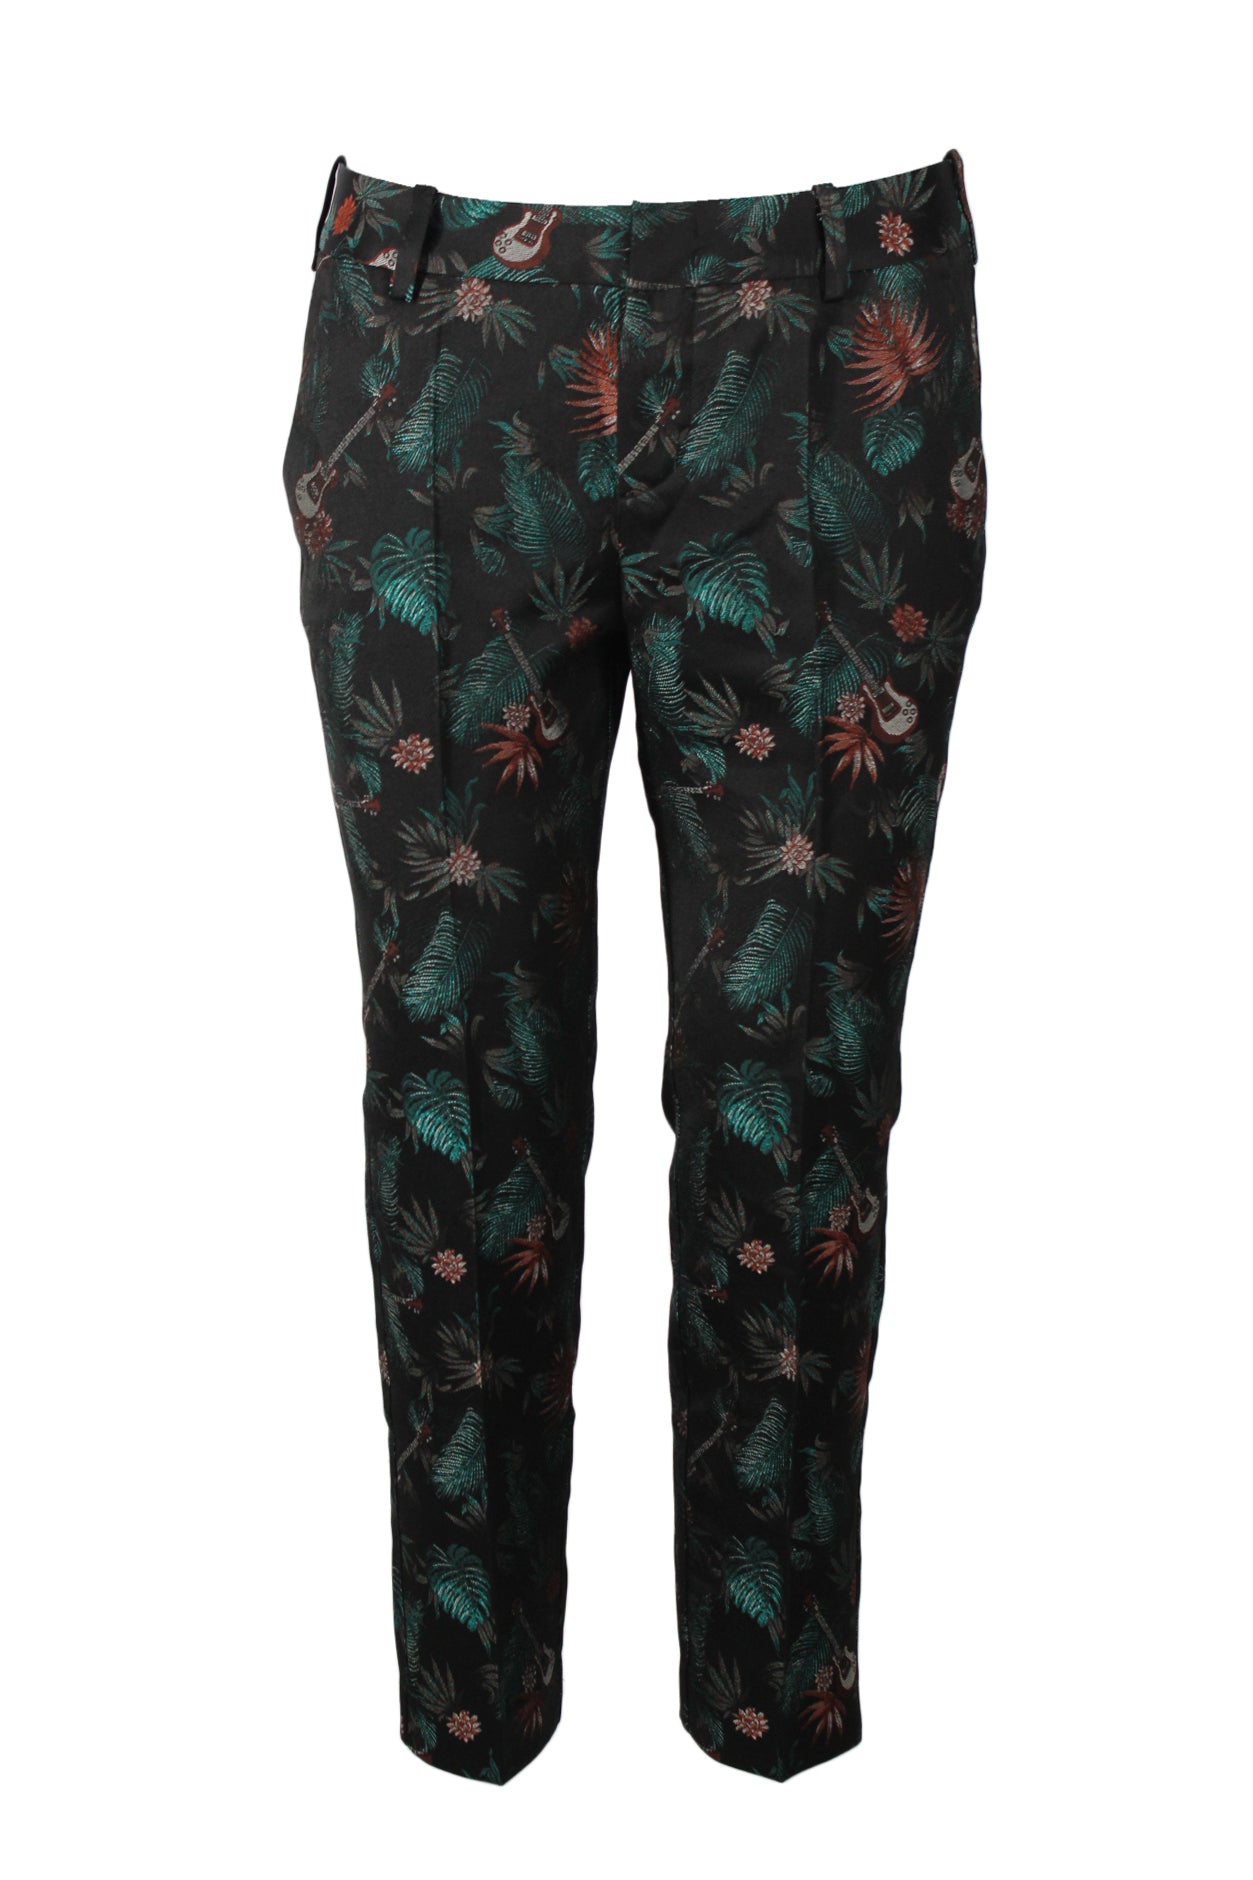 zadig & voltaire 'posh jungle' black/multicolor woven jacquard pants. features guitar/tropical leaf pattern throughout, front slash pockets, rear jetted pockets, and button fly. unlined. 